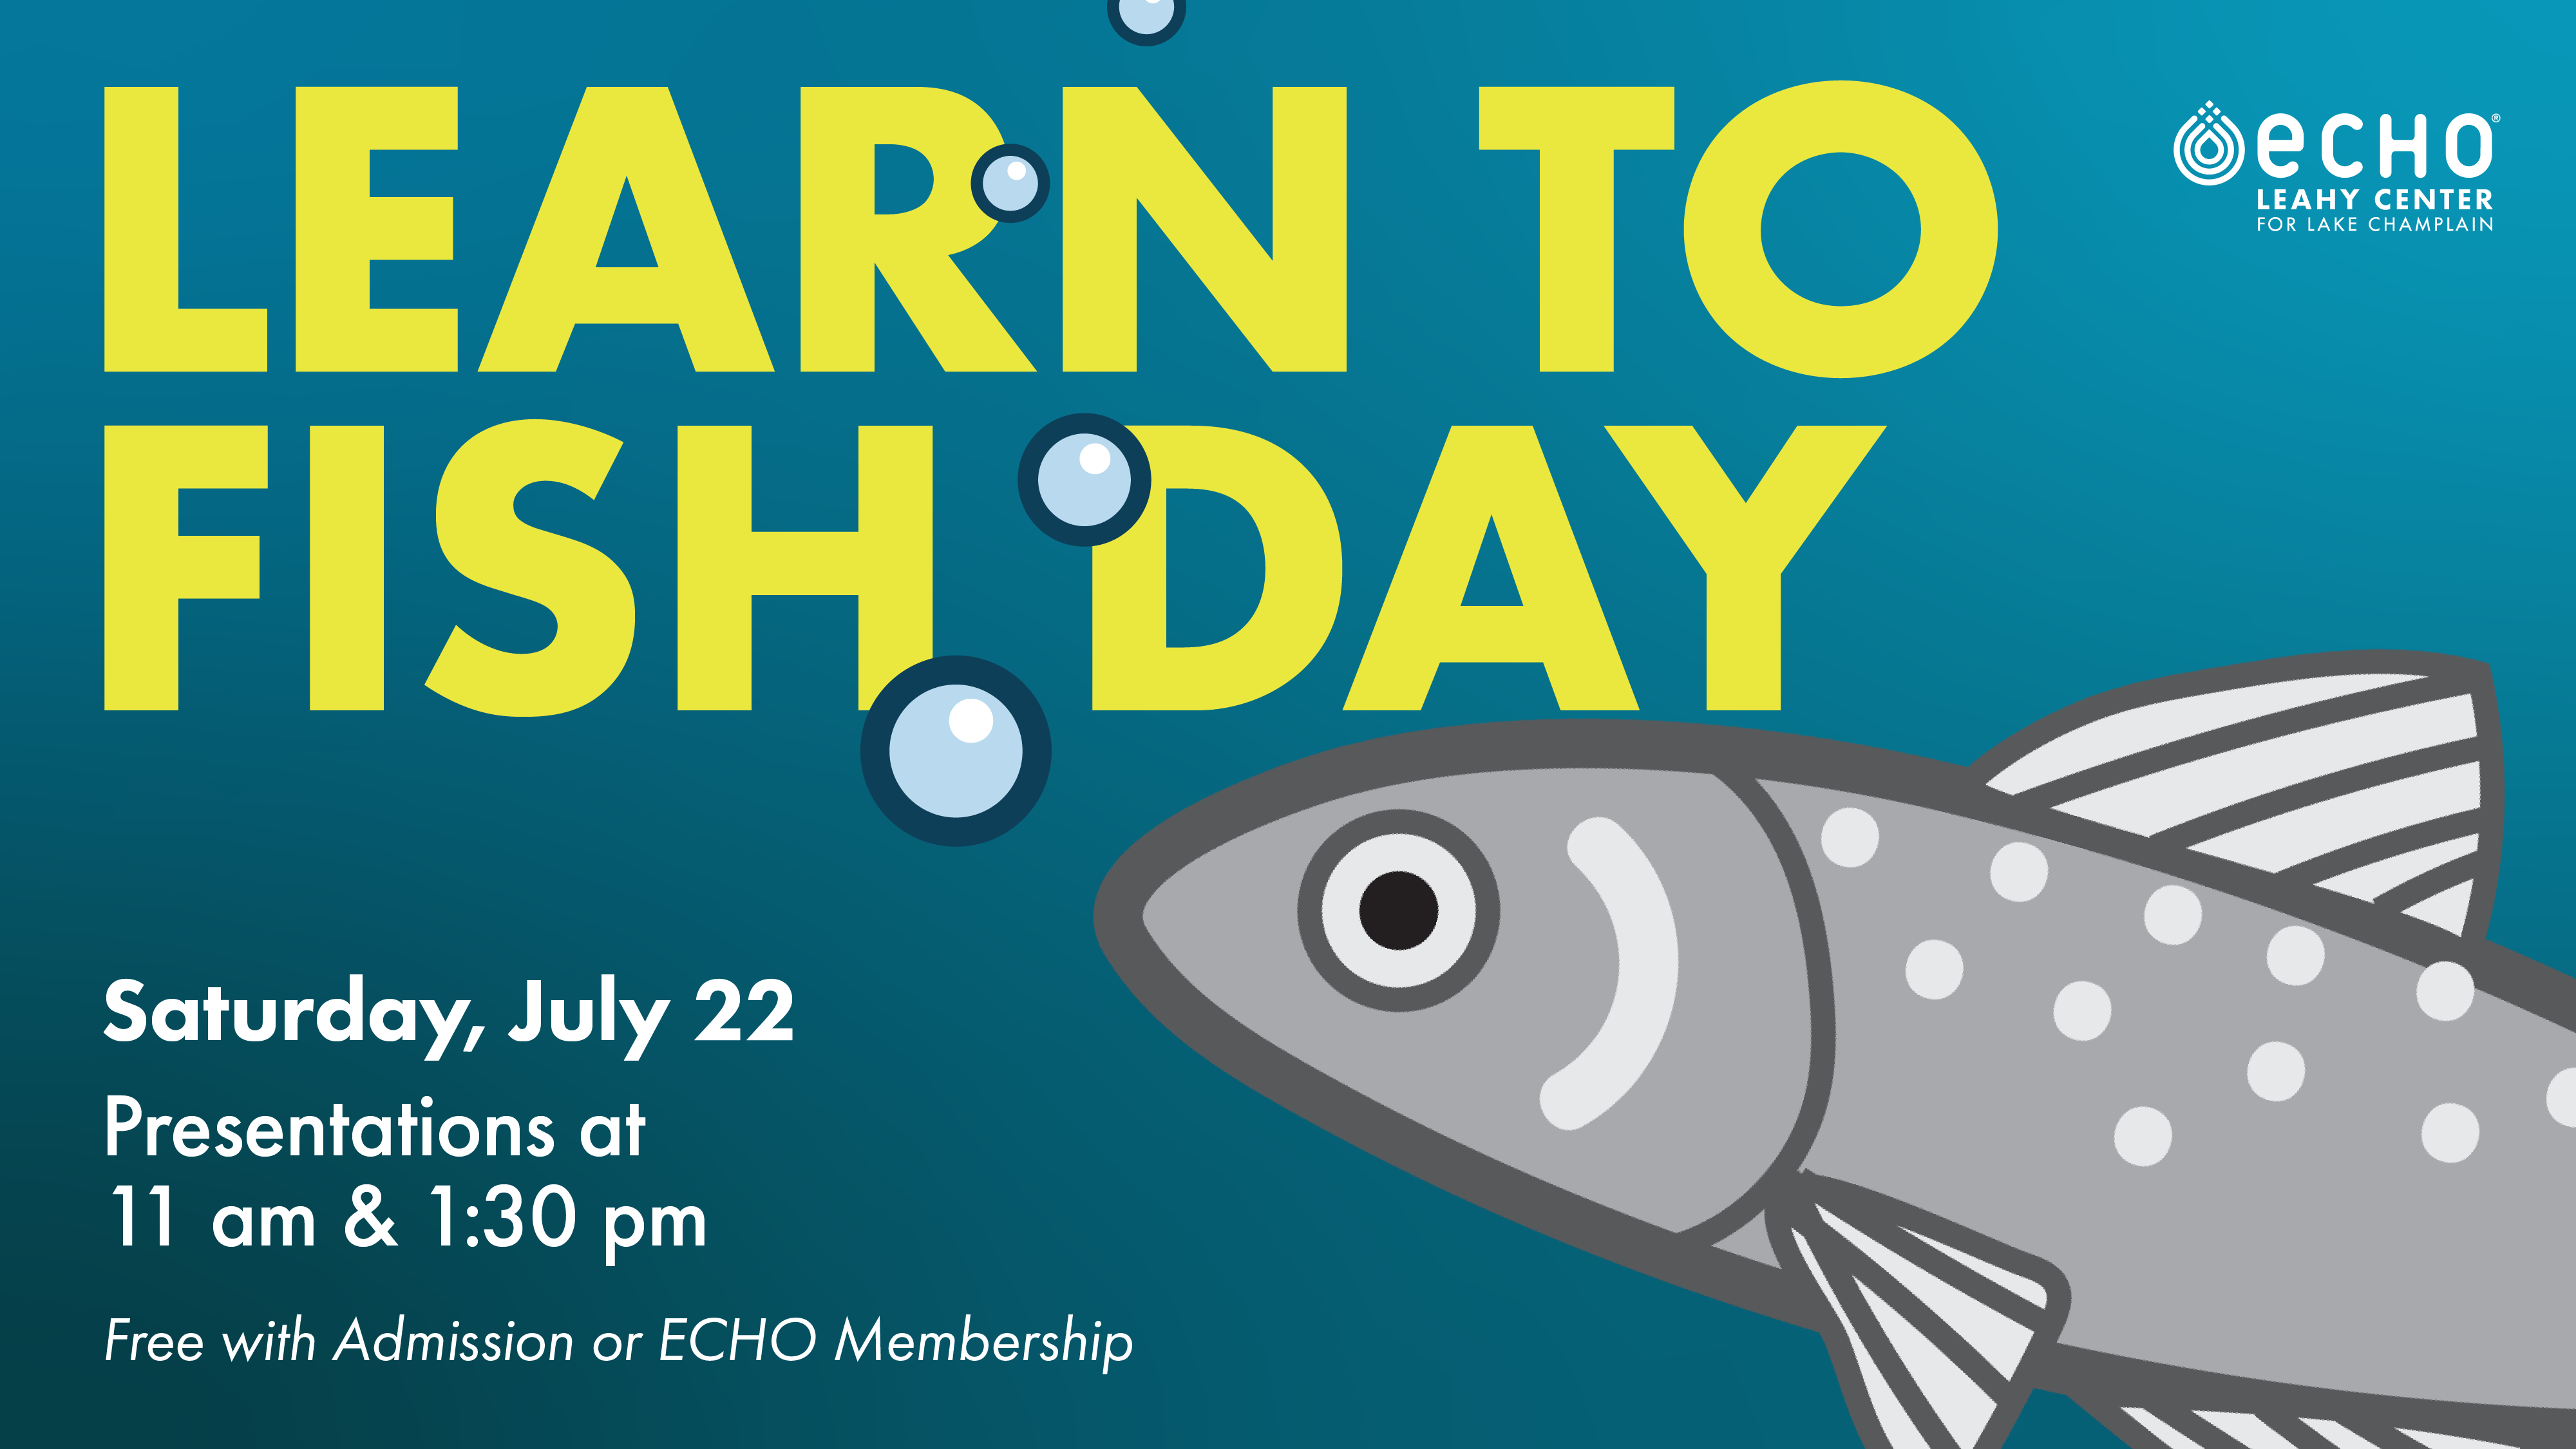 A dark teal background with an illustration of a gray fish. Text reads LEARN TO FISH DAY Saturday, July 22. Presentations at 11am and 1:30pm. Free with Admission or ECHO Membership.